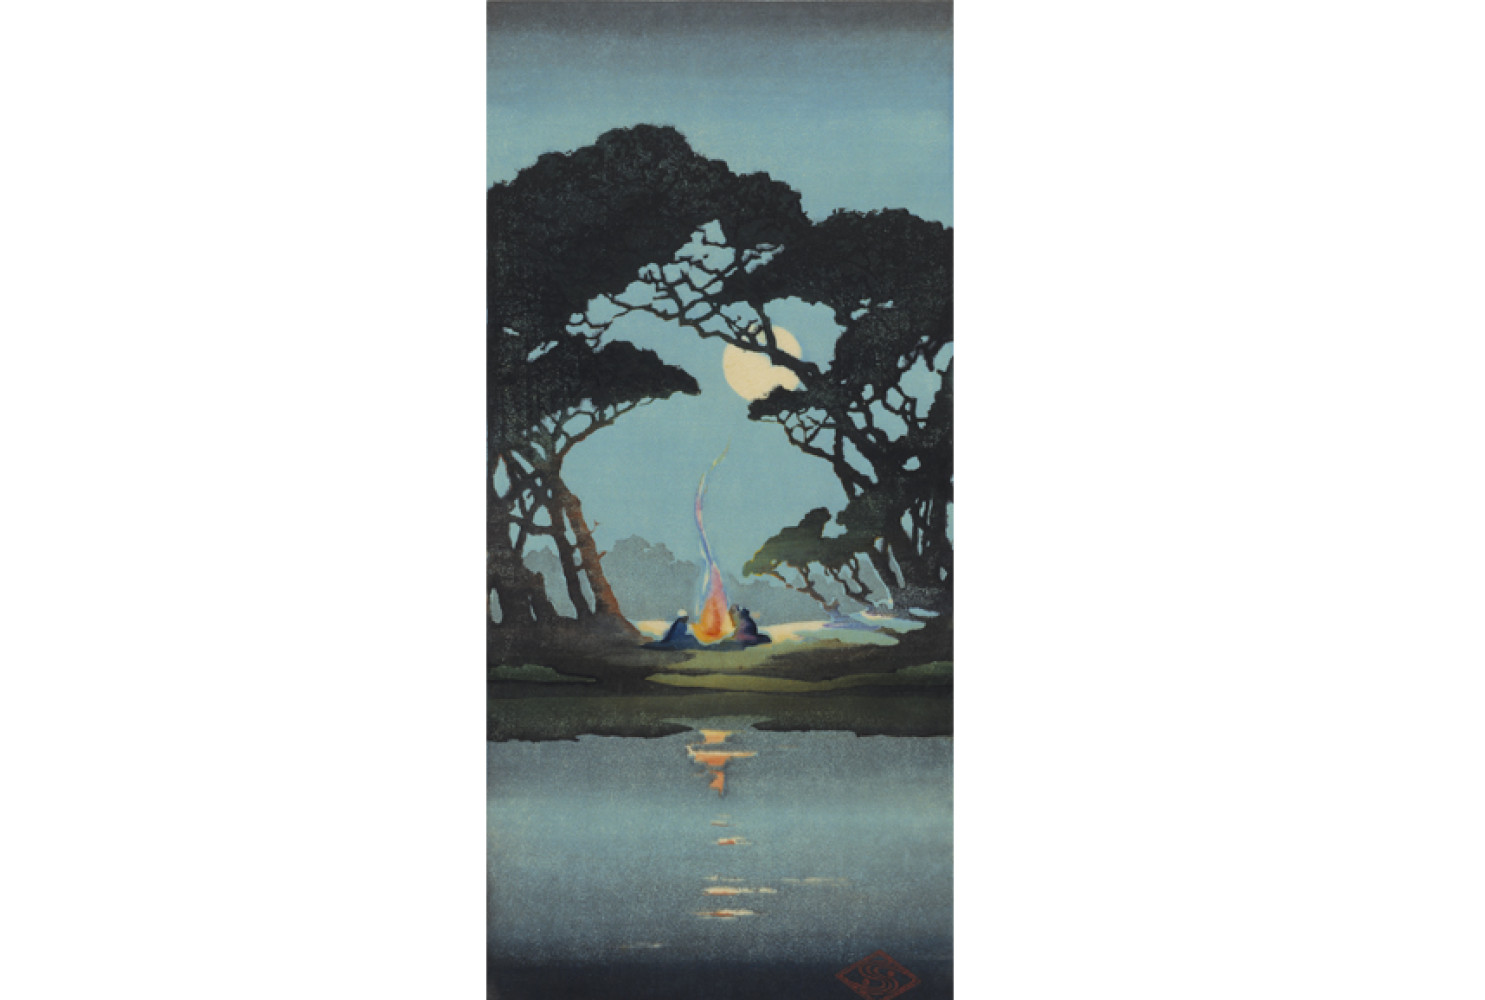 Moonlight on the Cooper River, ca. 1919, By Alice Ravenel Huger Smith (American, 1876—1958); Woodblock print on paper; Gift of Alice Ravenel Huger Smith; 1955.006.0010